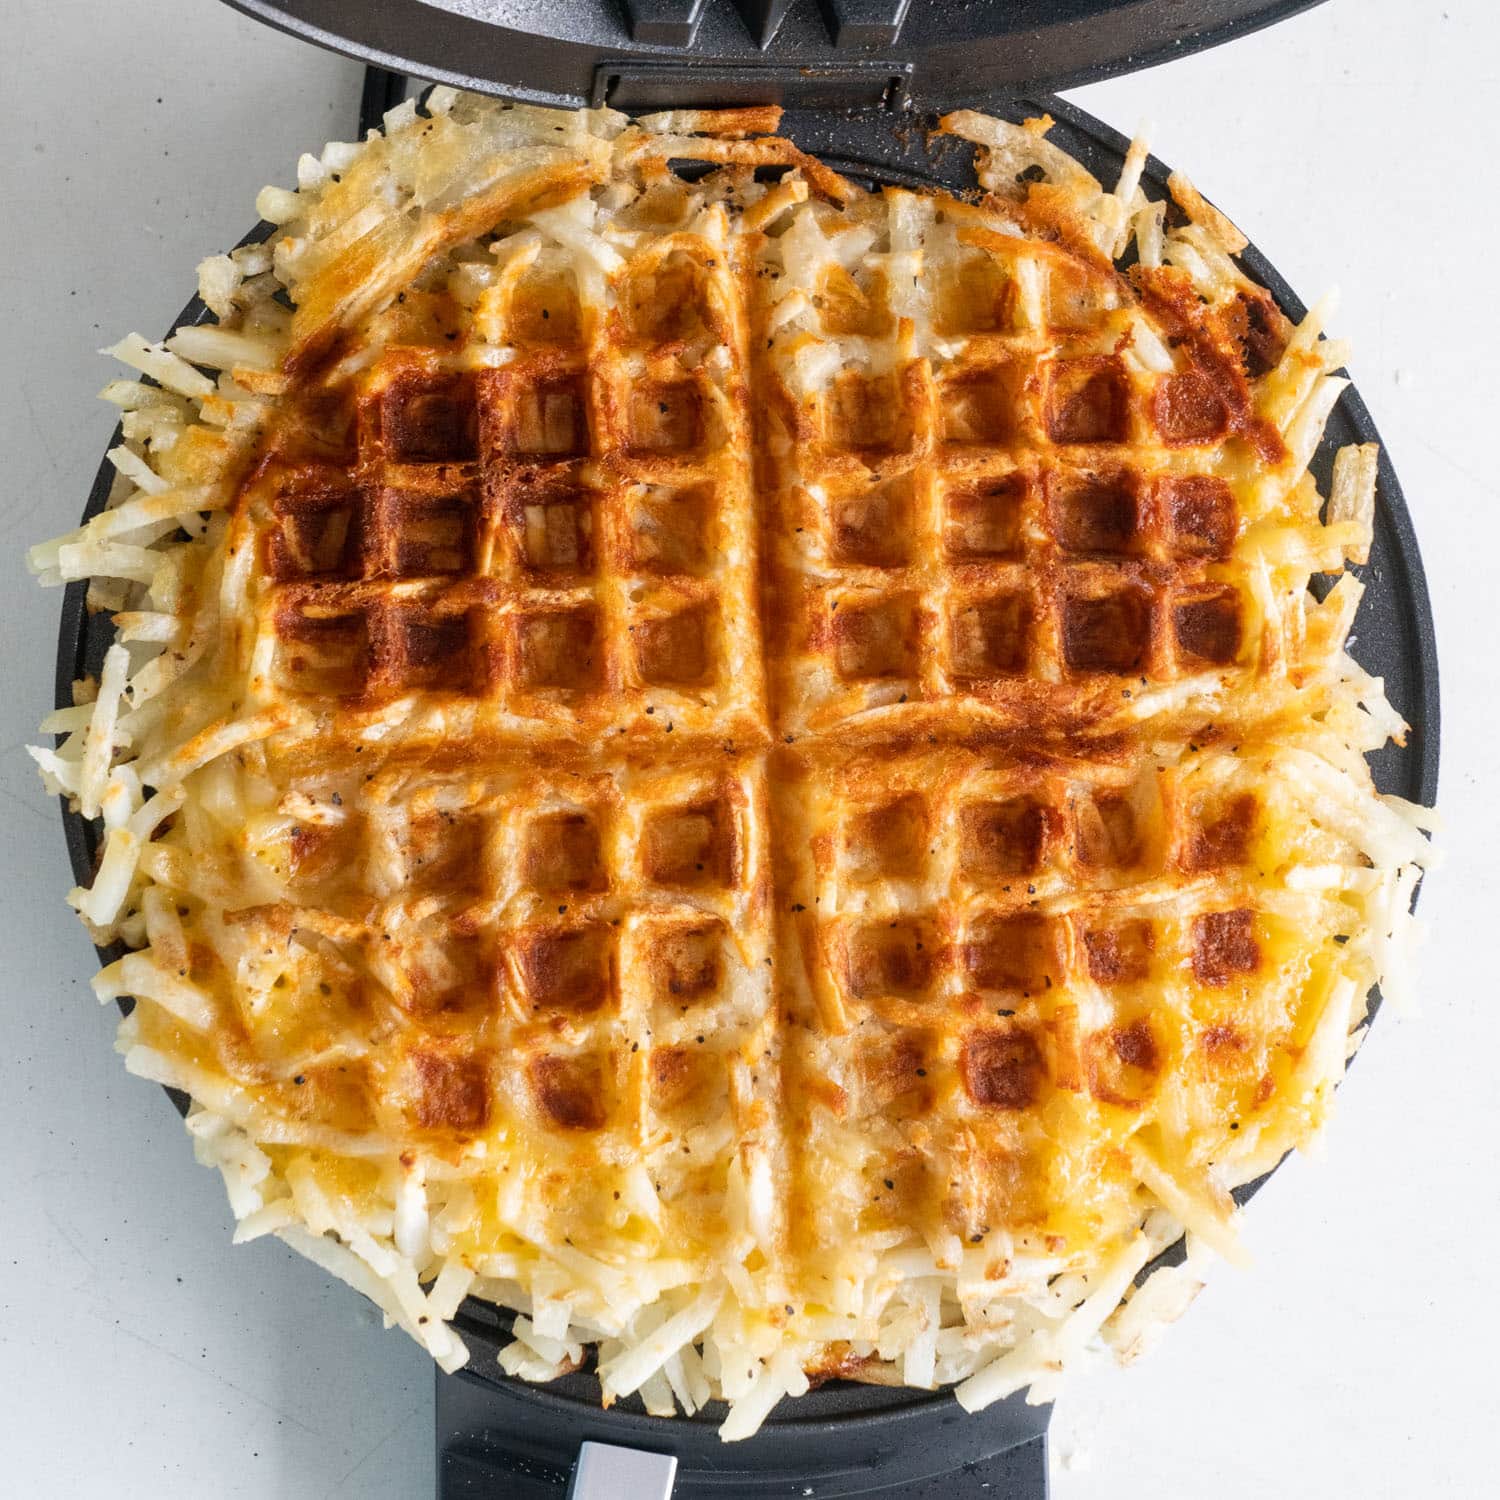 Waffle Iron Hash browns - From Calculu∫ to Cupcake∫